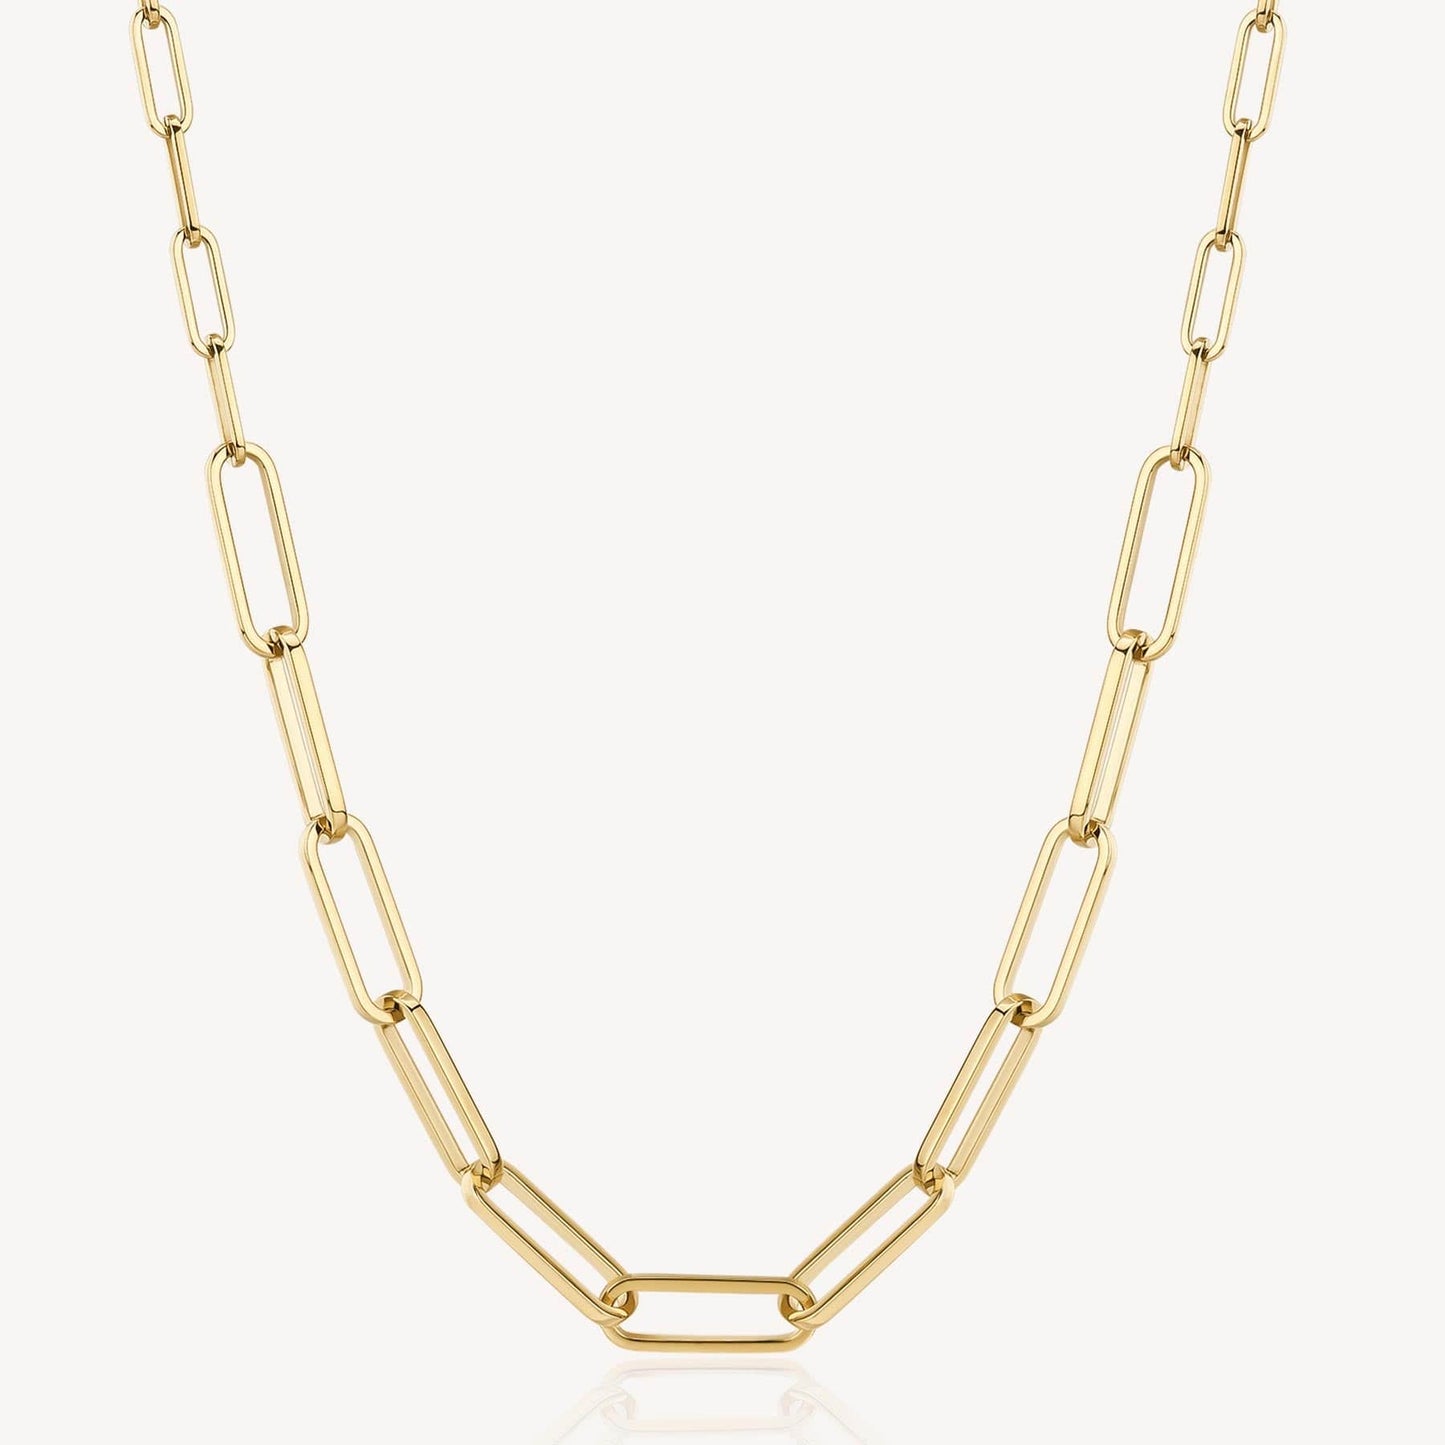 NKL-SS Stainless Steel Gold Tone Long Graduating Oval Link Chain Necklace